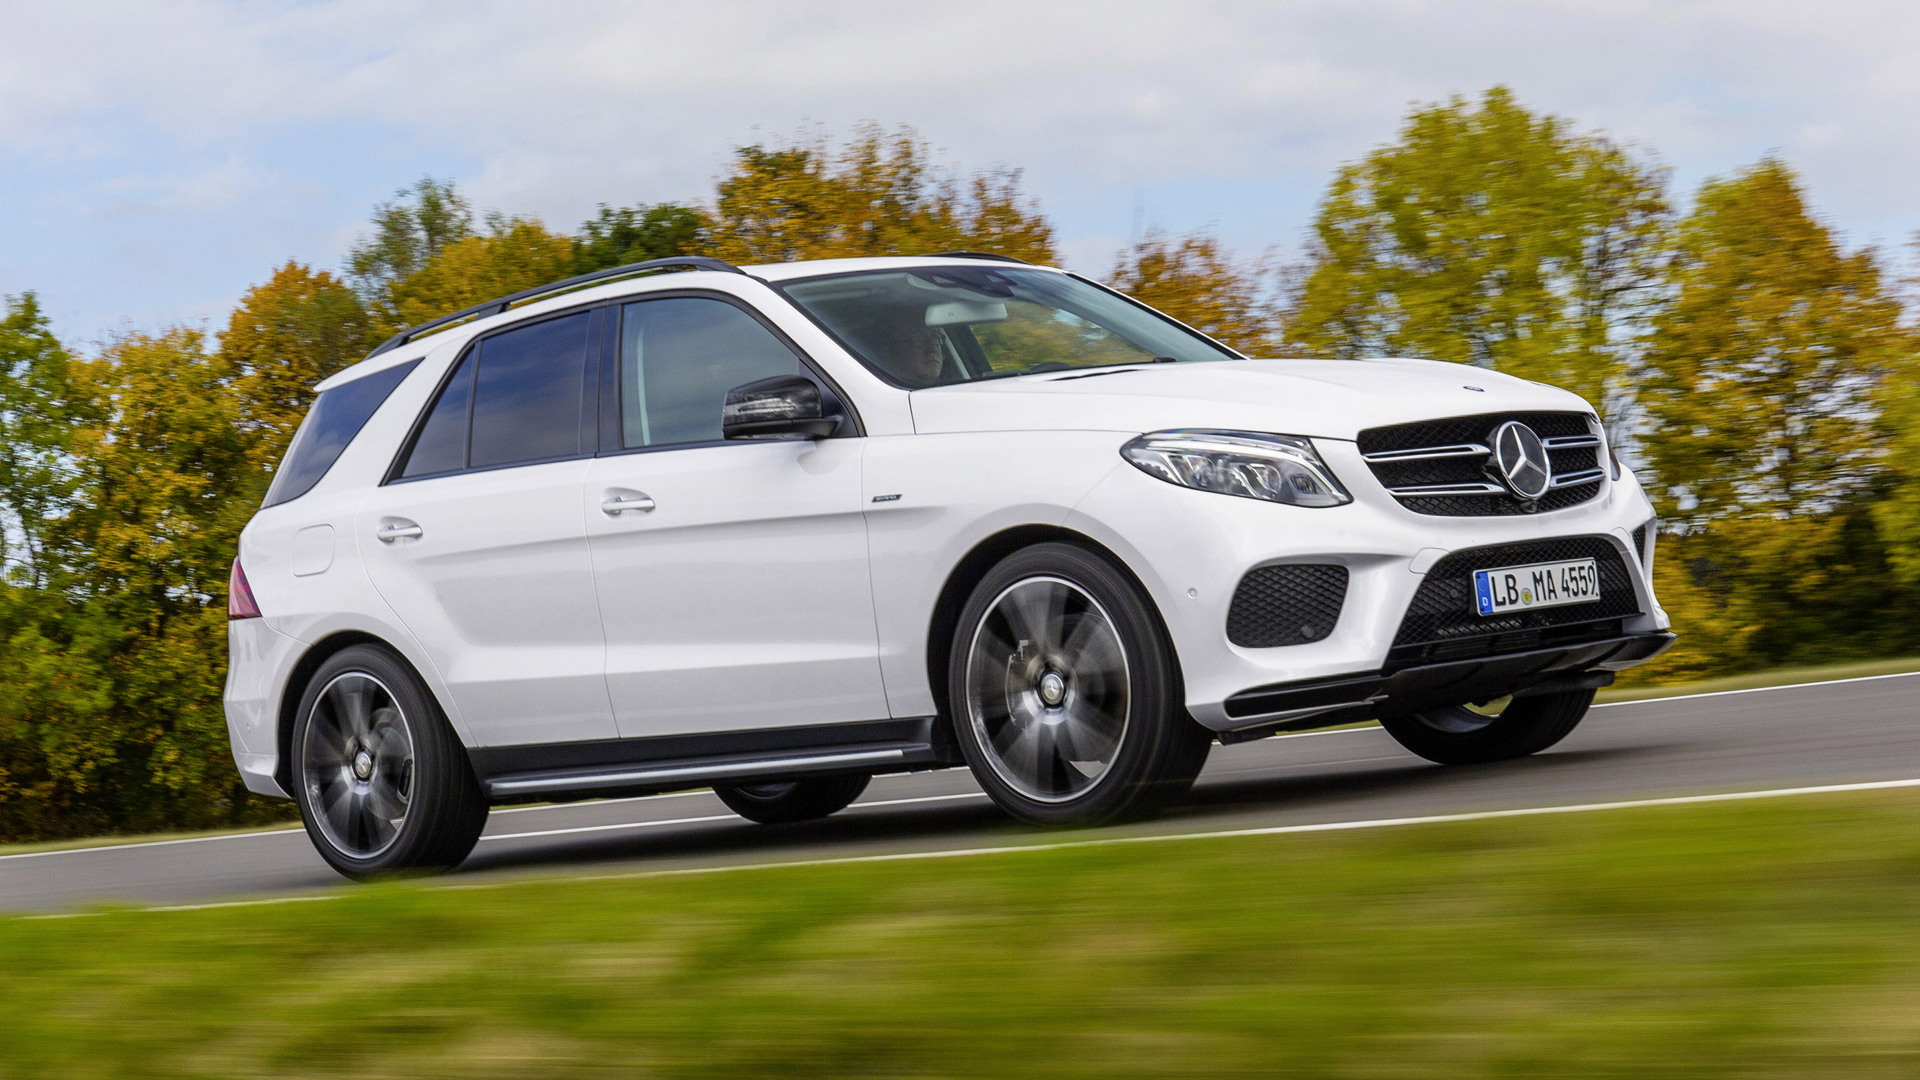 16 Mercedes Benz Gle450 Amg 4matic Joins Growing Amg Sport Arsenal